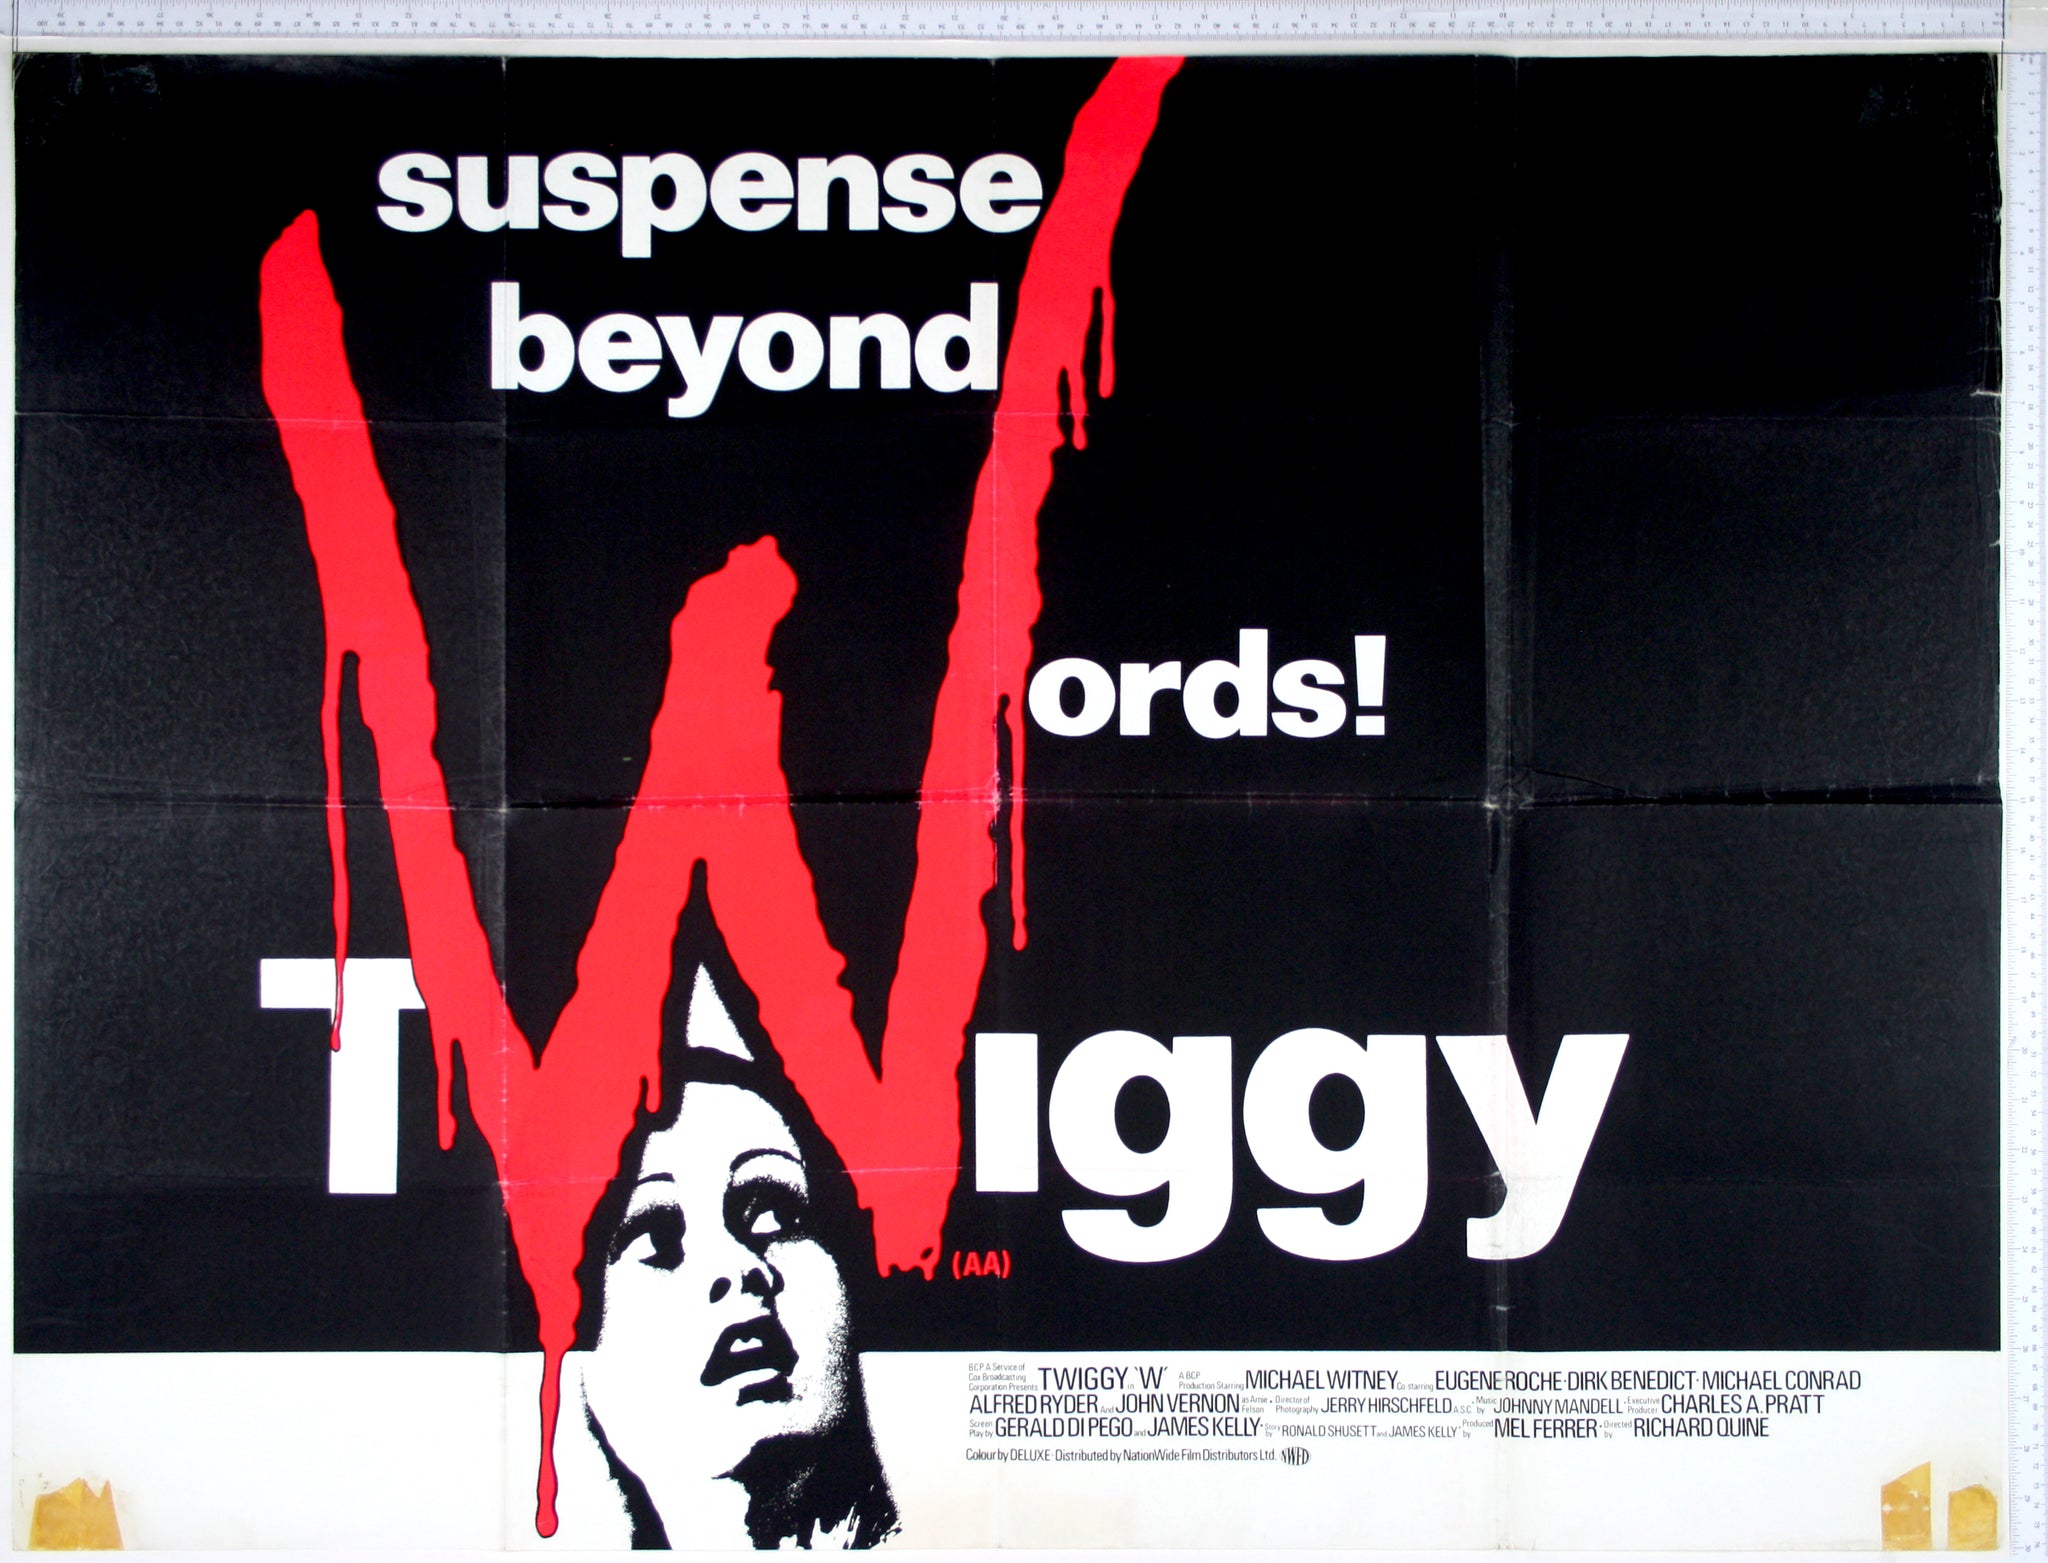 On black, a huge blood-dripping W is used as W of words and W in Twiggy, her high contrast photo visible at the bottom.